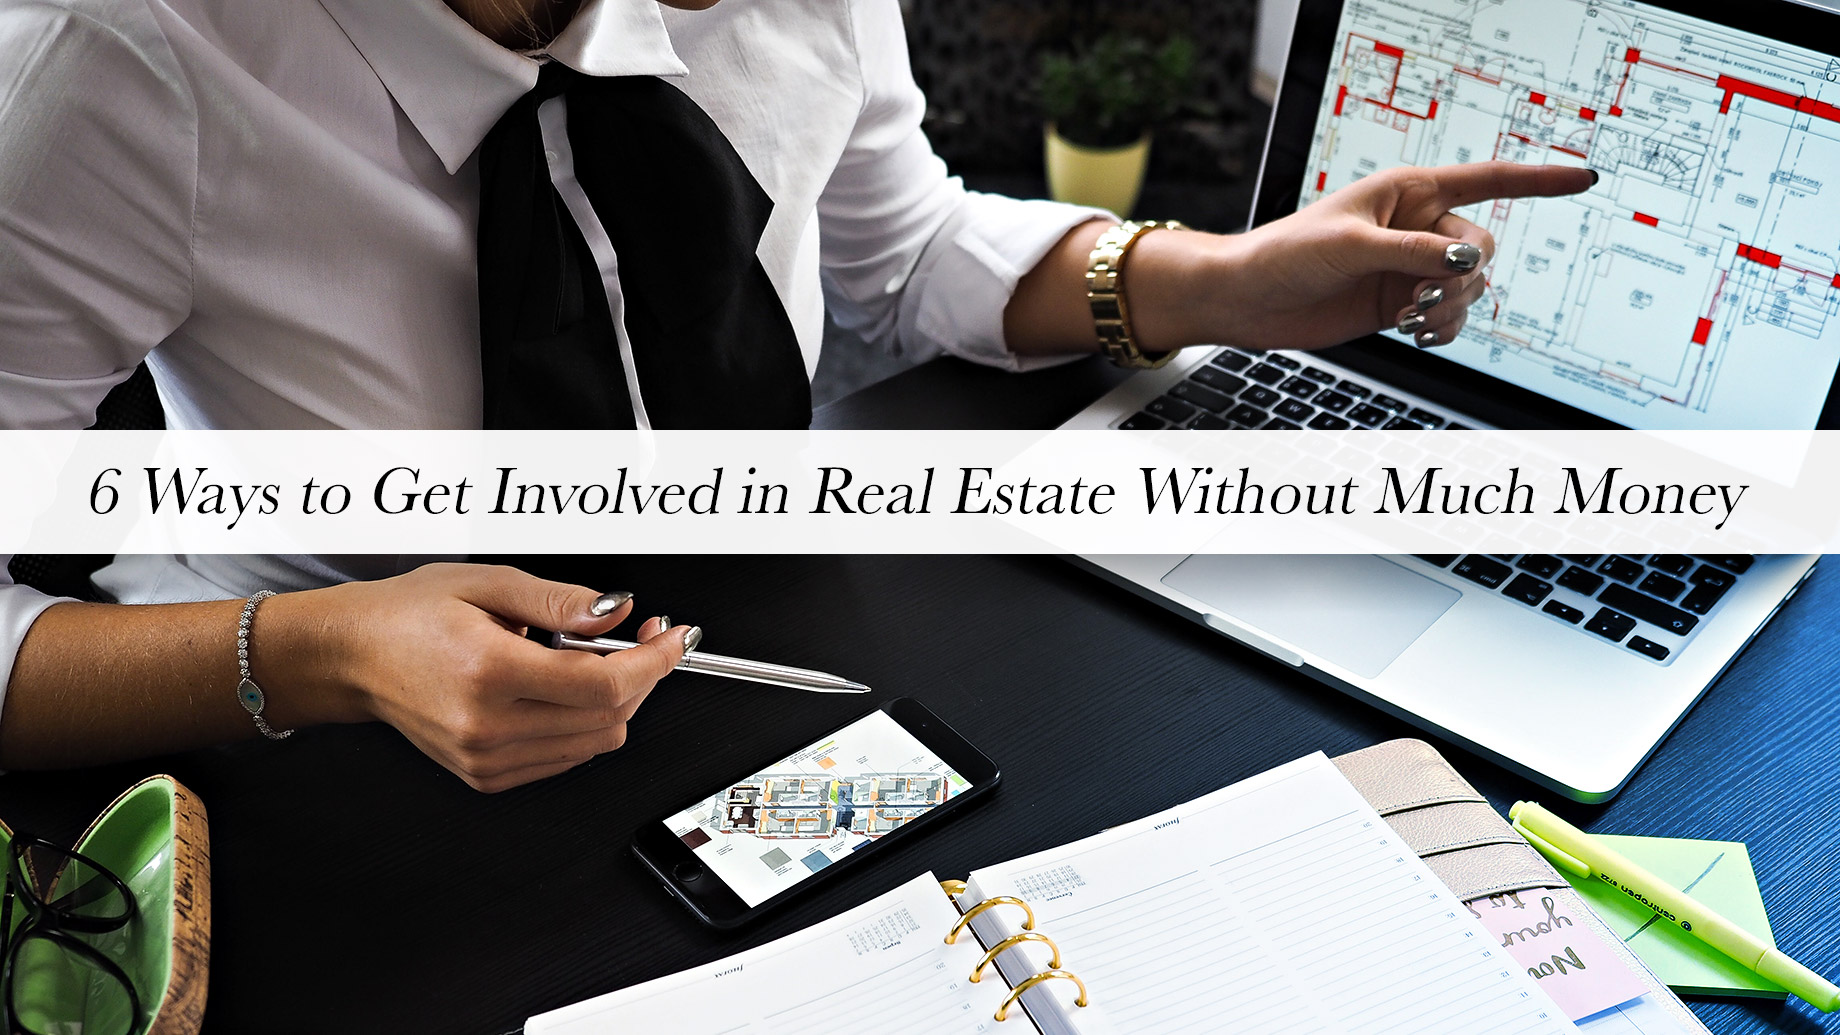 6 Ways to Get Involved in Real Estate Without Much Money